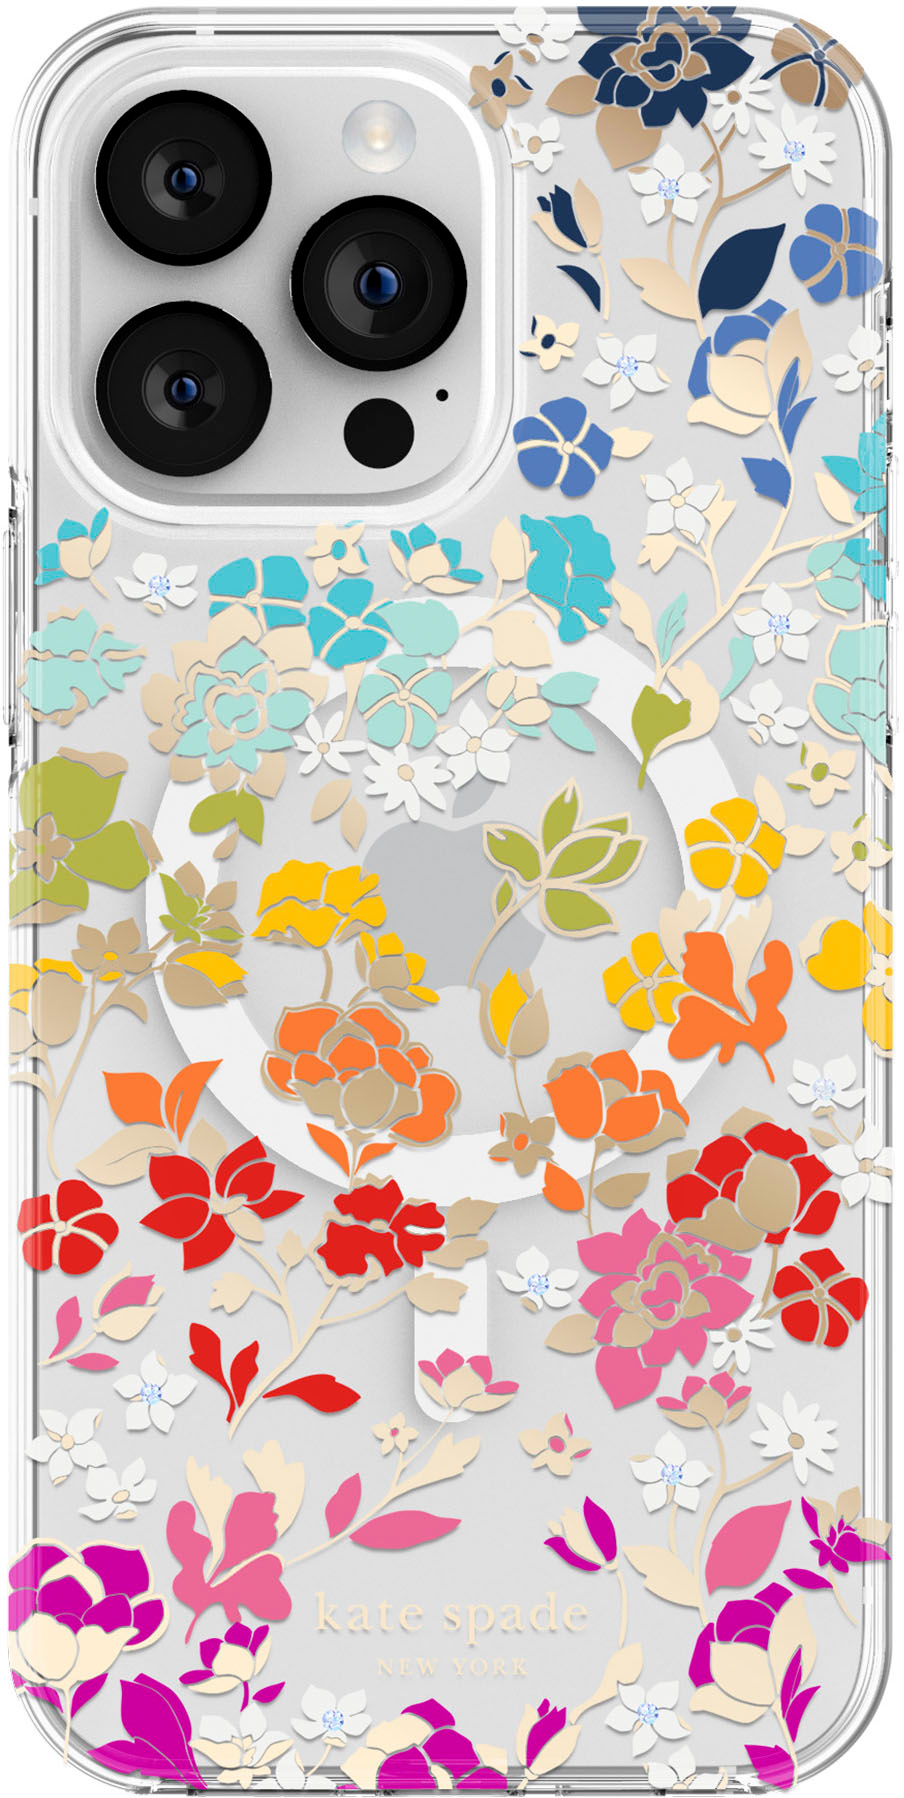  kate spade new york Protective Hardshell Case for iPhone 13 Pro  - Hollyhock Floral Clear : Cell Phones & Accessories